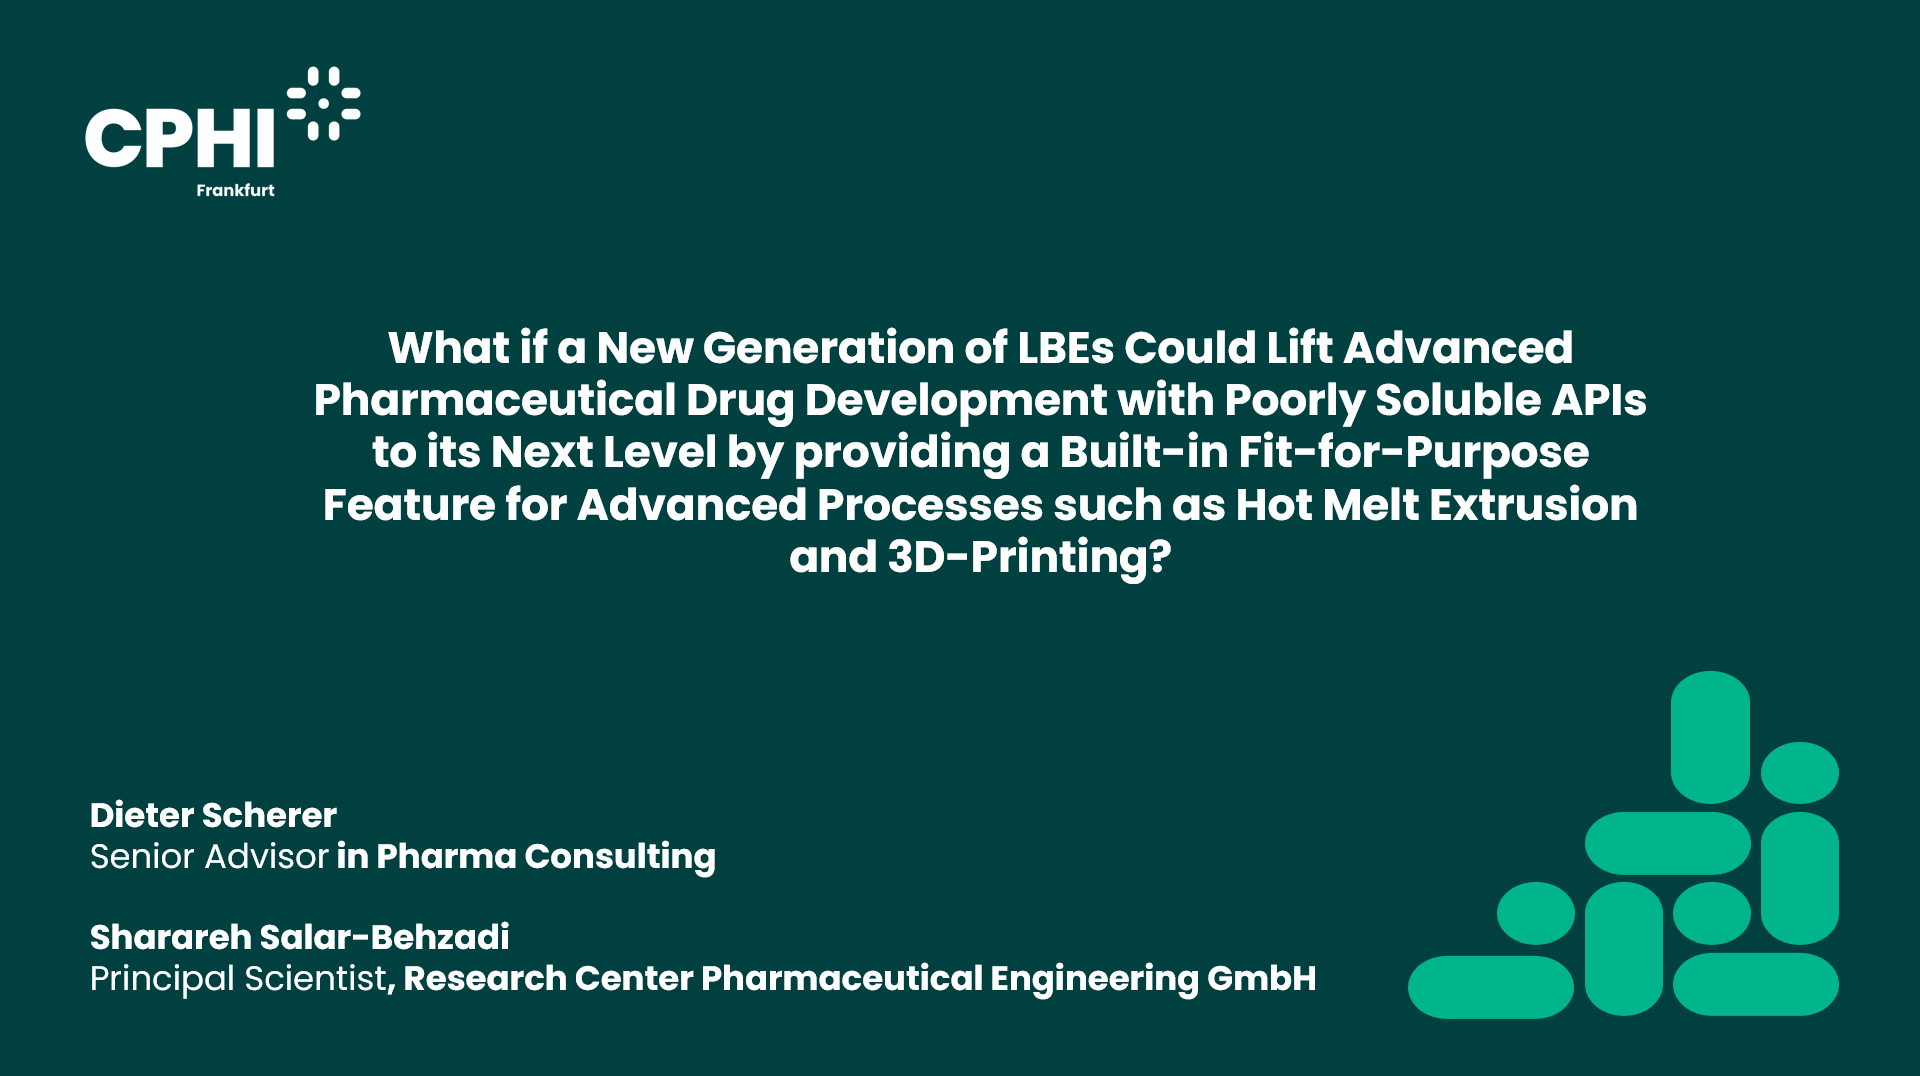 What if a New Generation of LBEs Could Lift Advanced Pharmaceutical Drug Development with Poorly Soluble APIs to its Next Level by providing a Built-in Fit-for-Purpose Feature for Advanced Processes such as Hot Melt Extrusion and 3D-Printing?